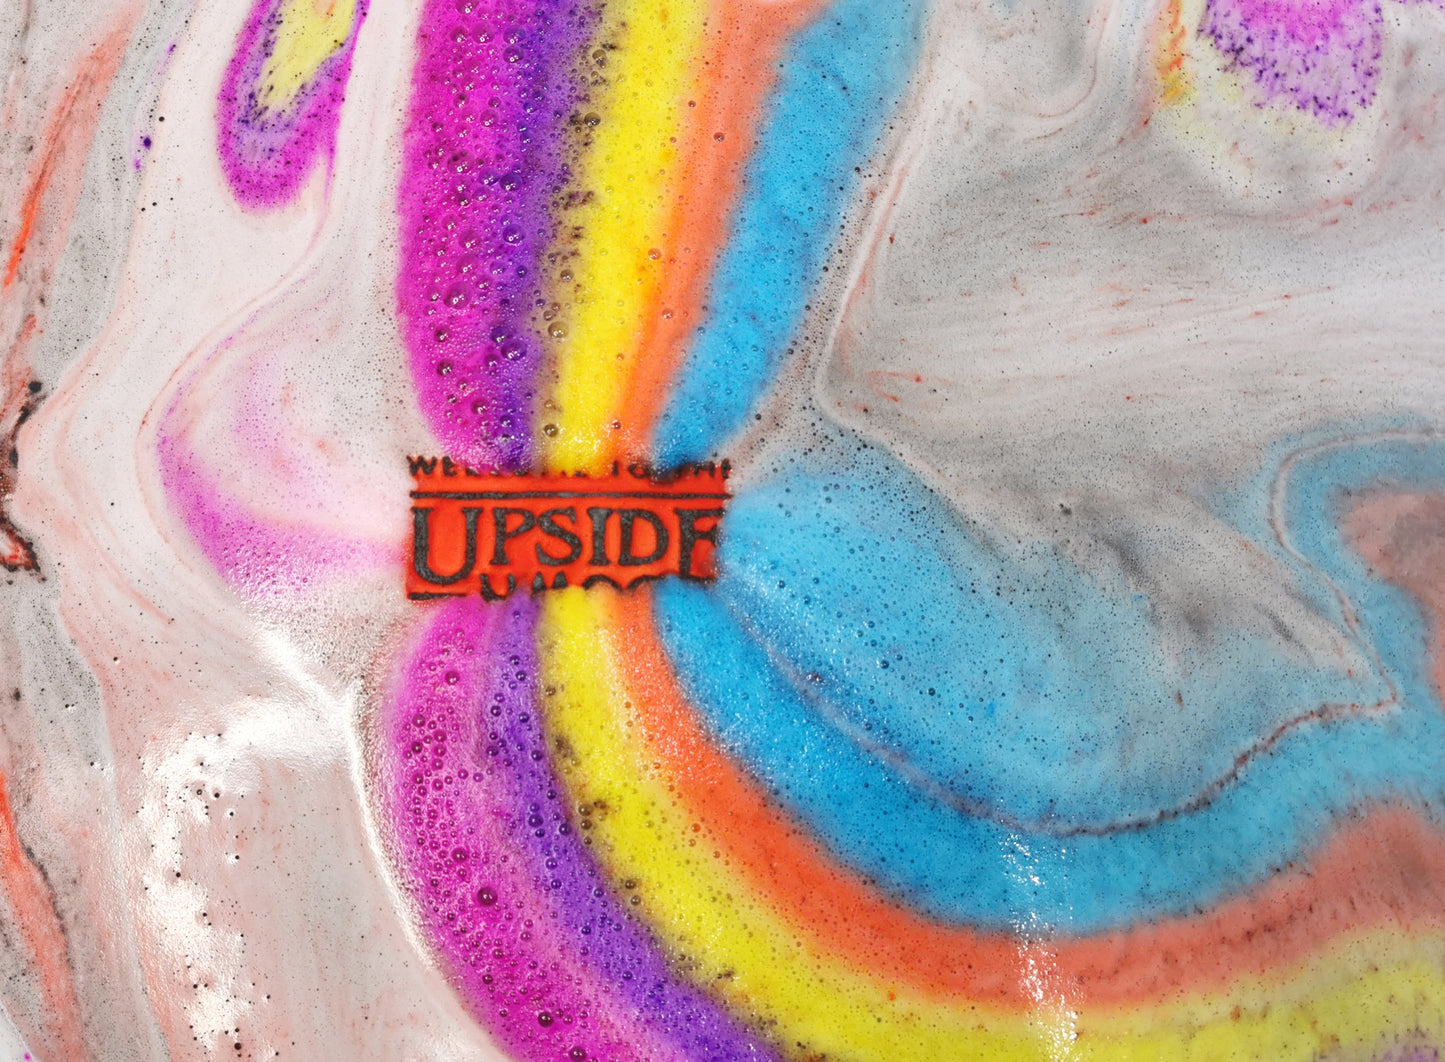 Welcome to the Upside Down Bath Bomb